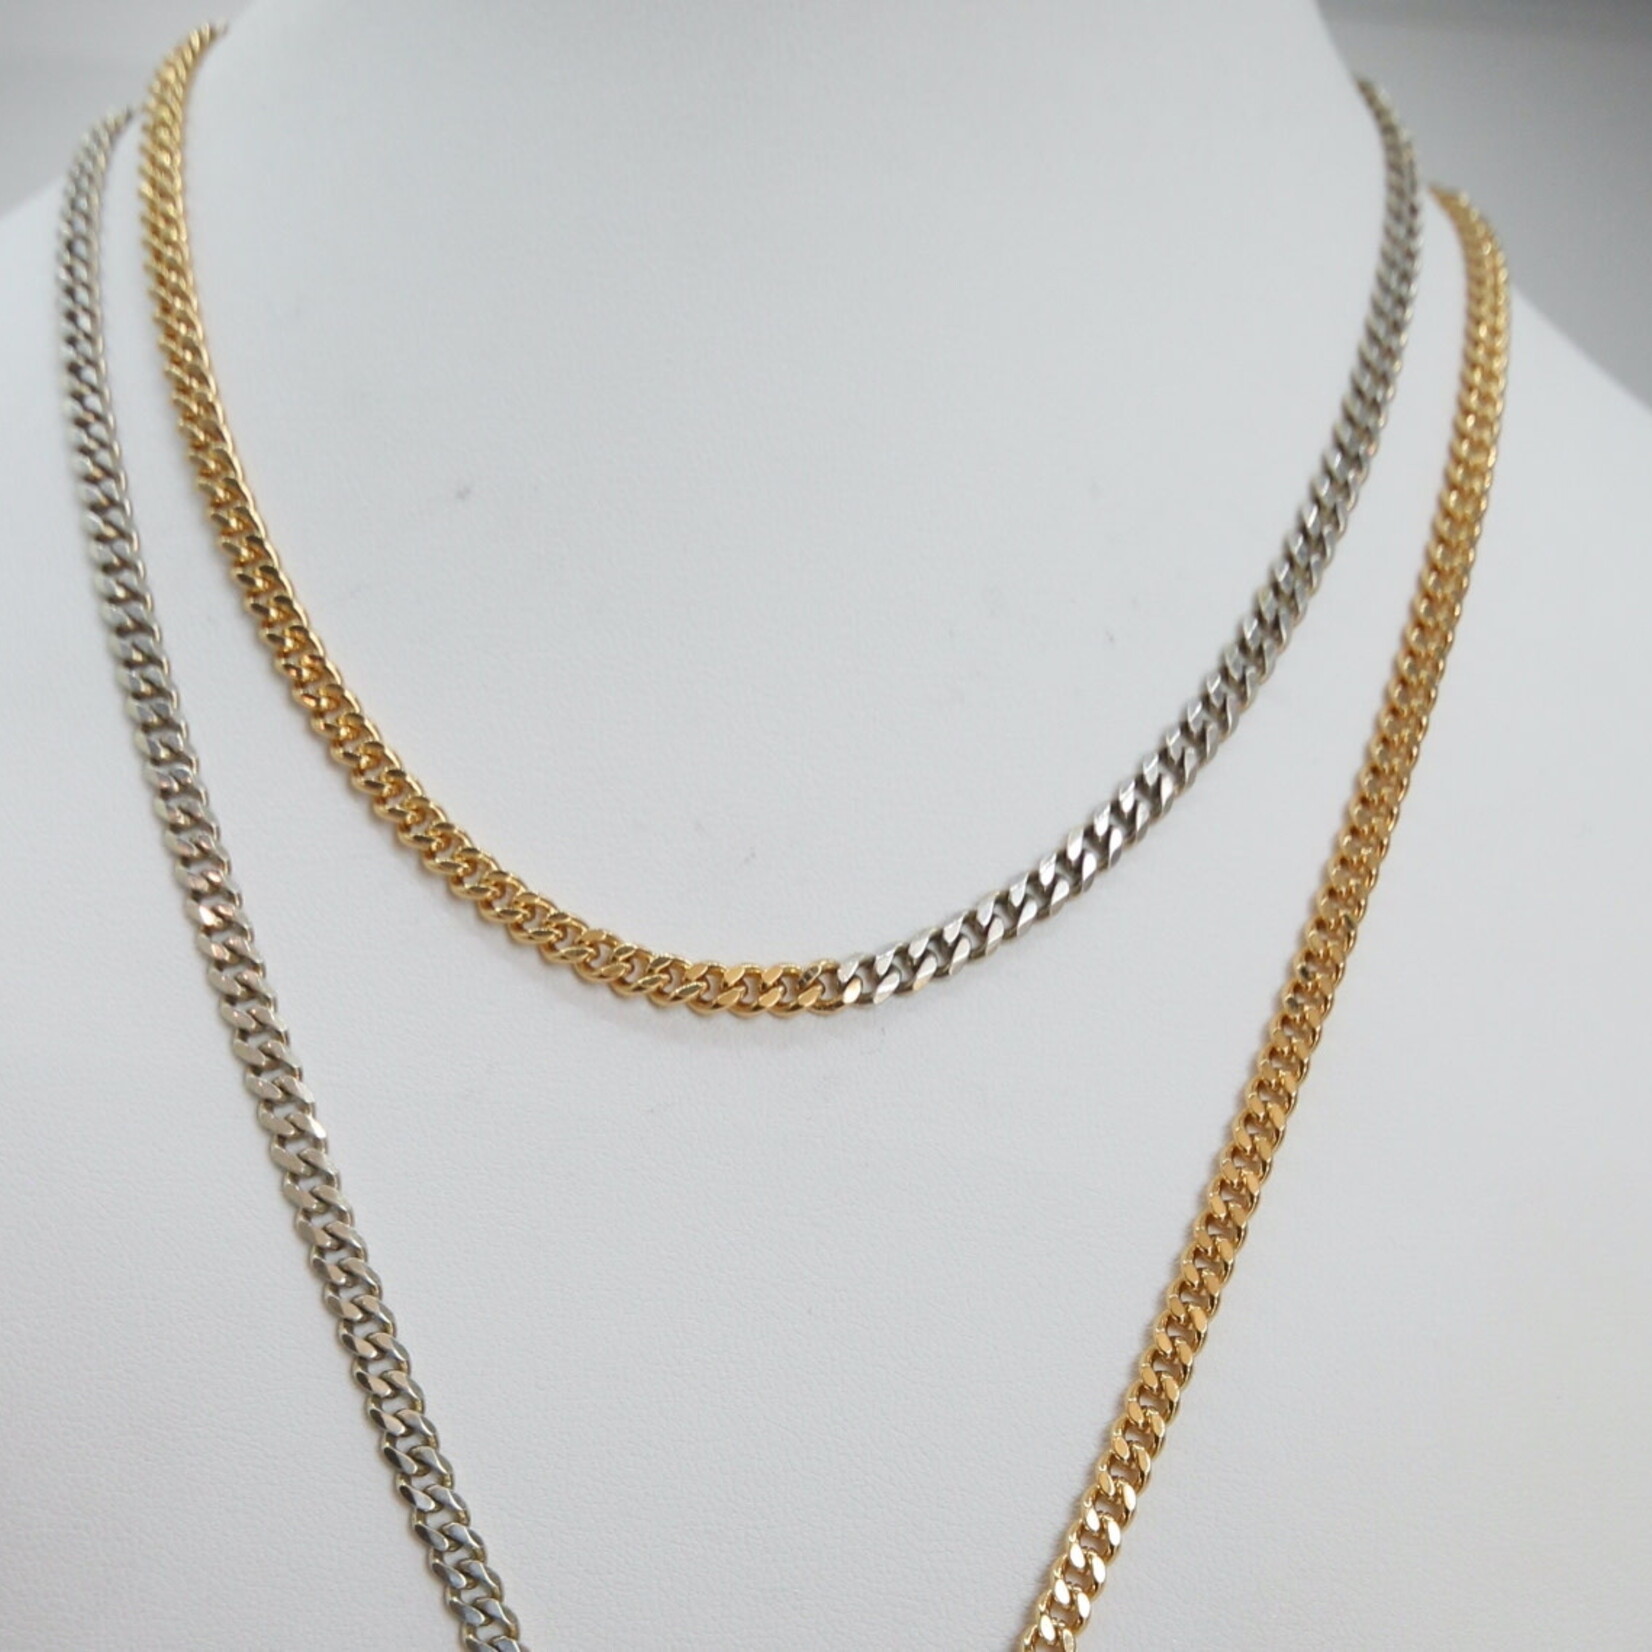 Silver and Gold Curb Chain and Oxidized Shield with Diamond Star